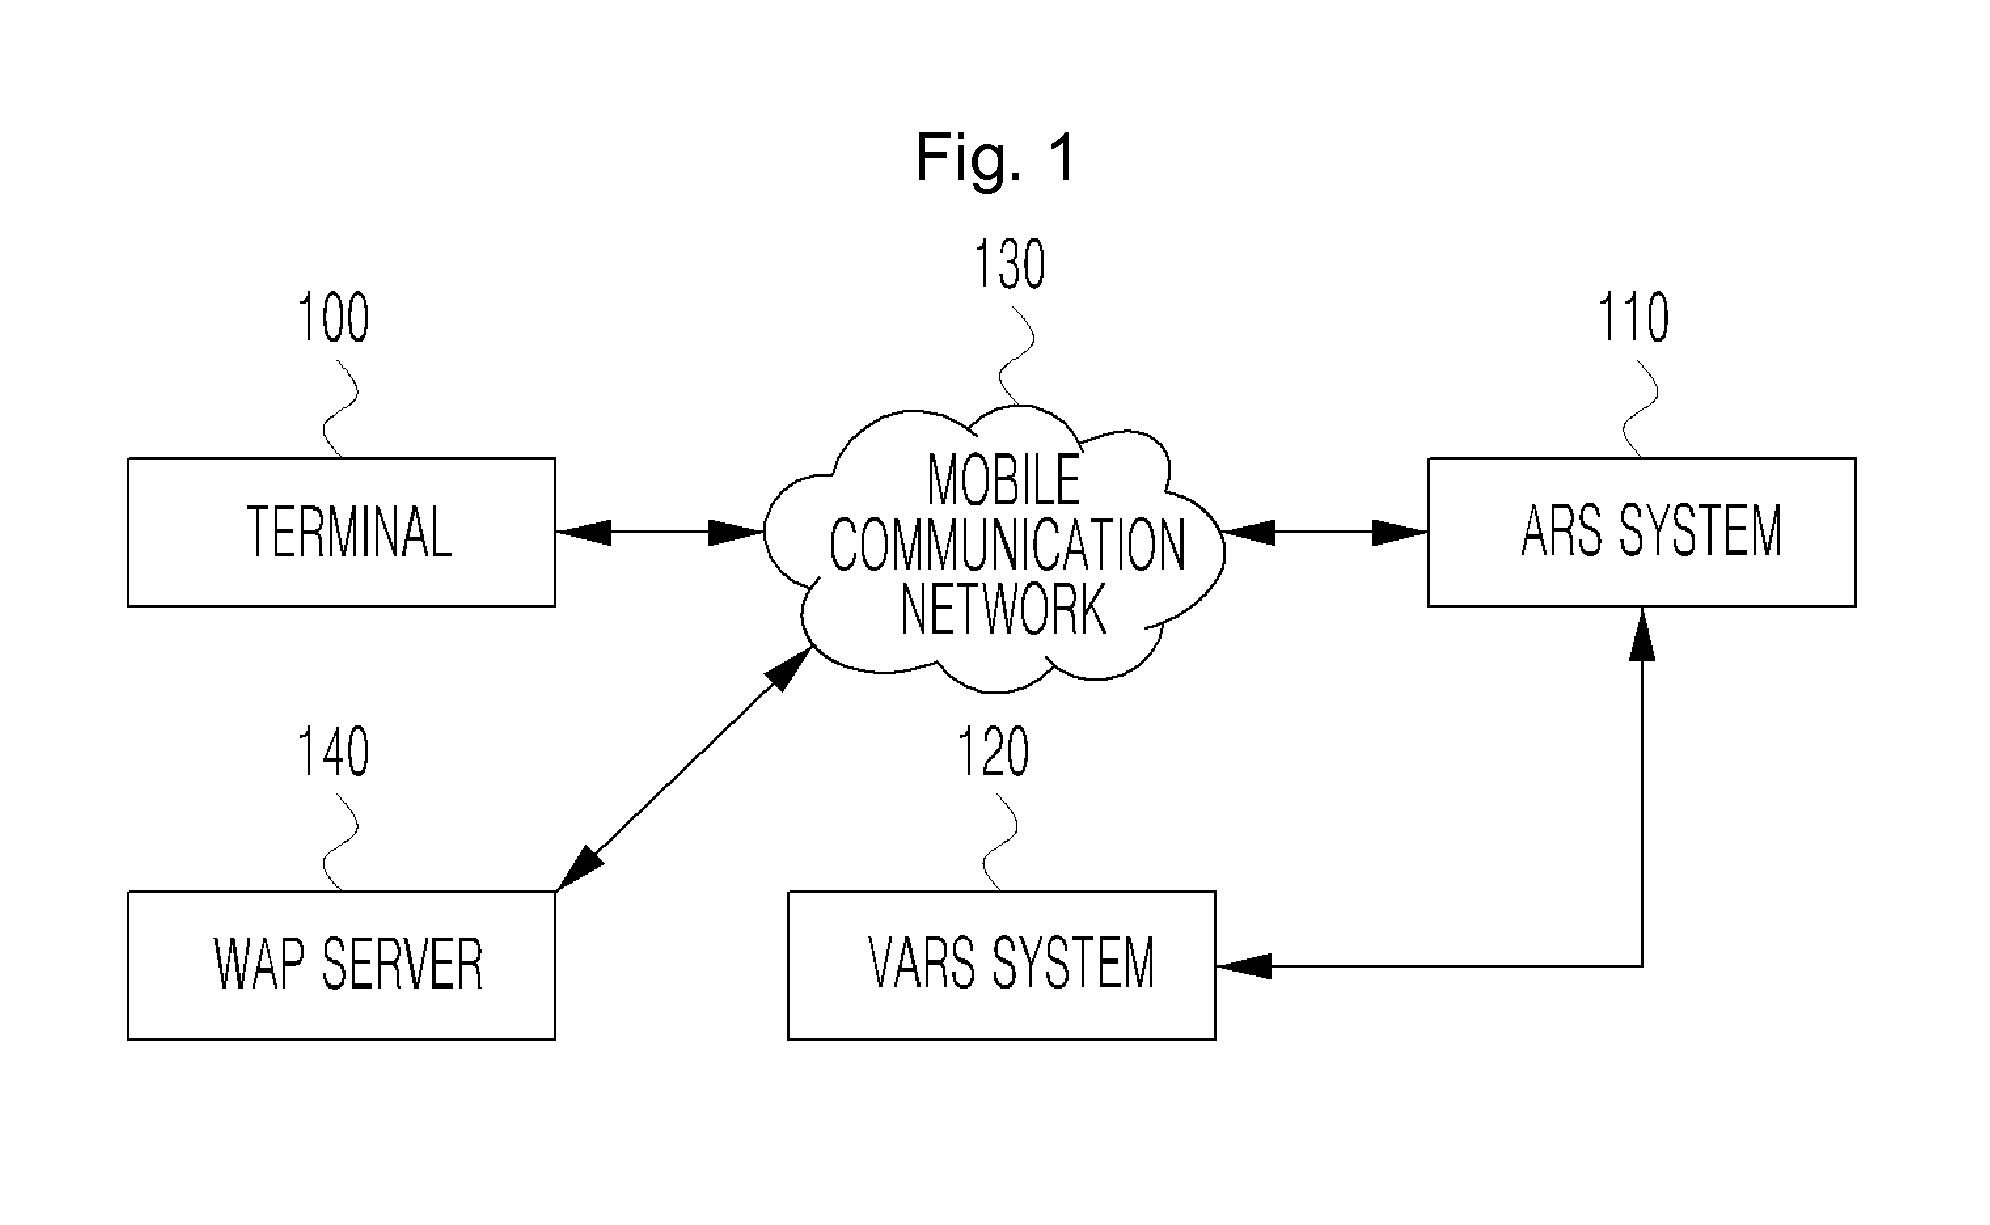 Visual ars service system and method enabled by mobile terminal's call control function